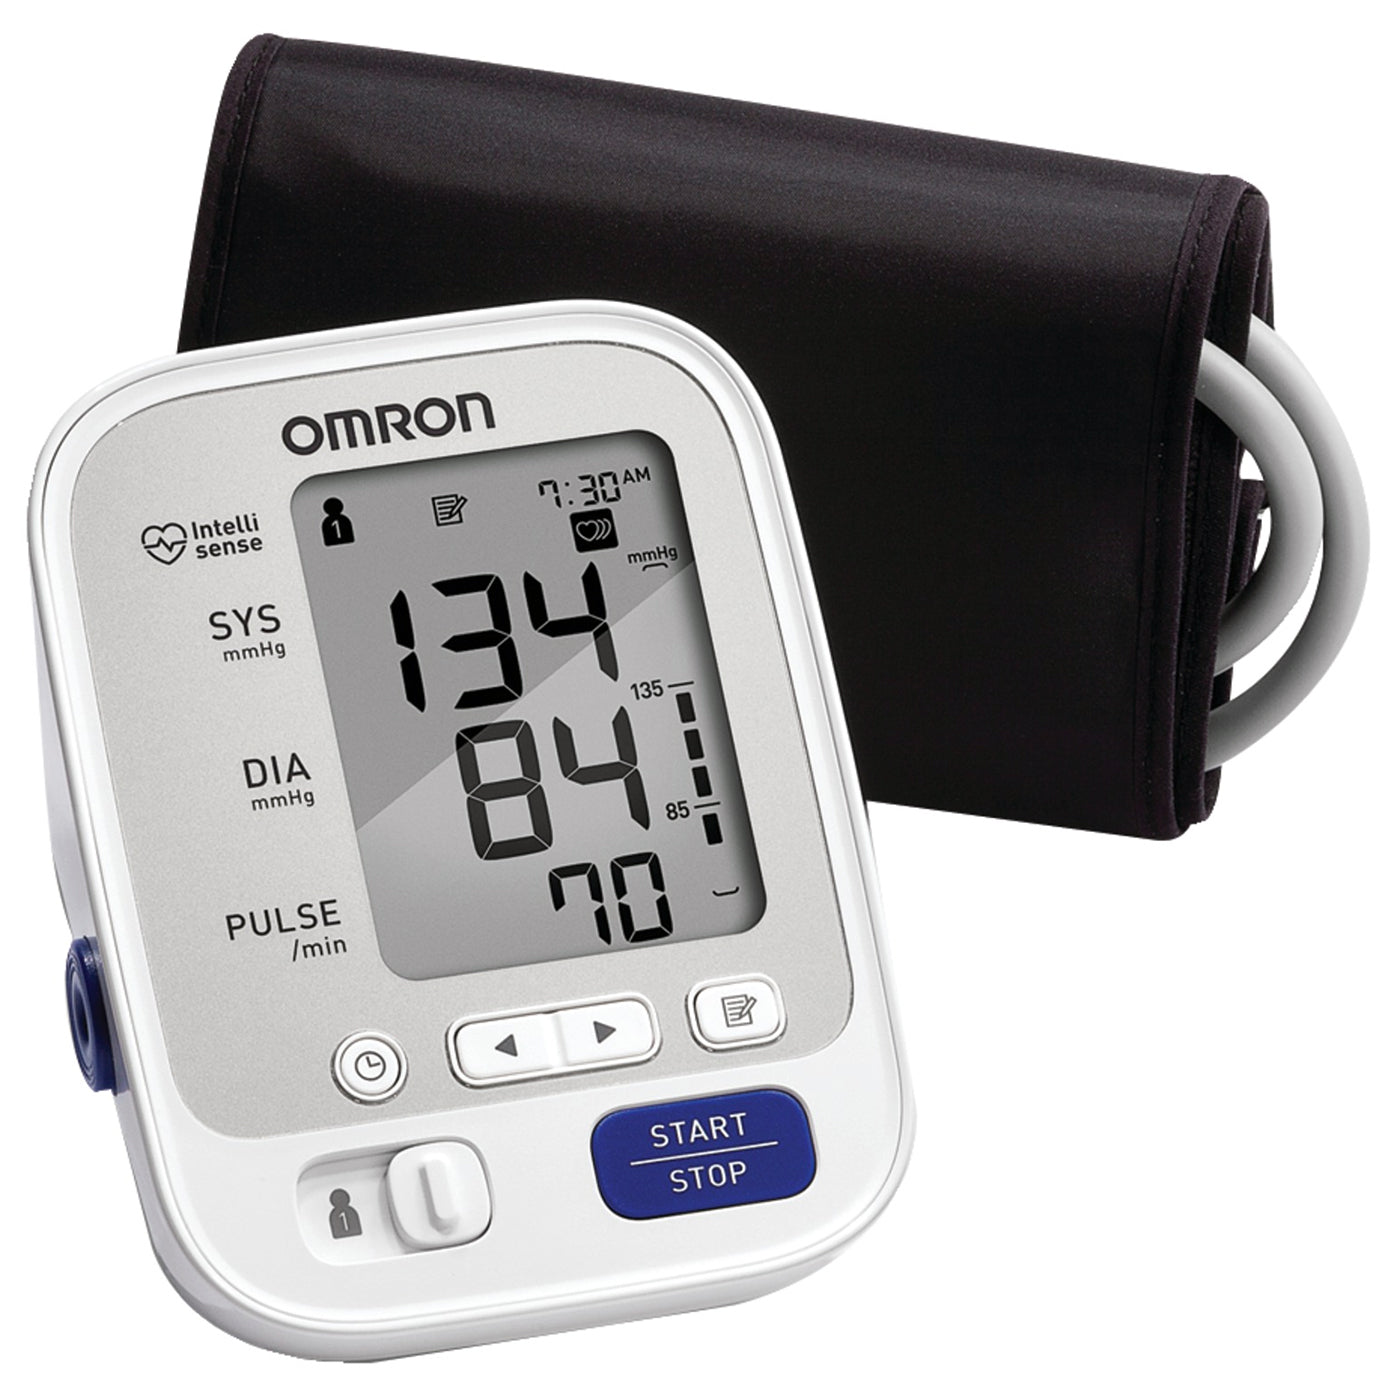 Omron 10 Series Blood Pressure Monitor Review & How To Use & Setup